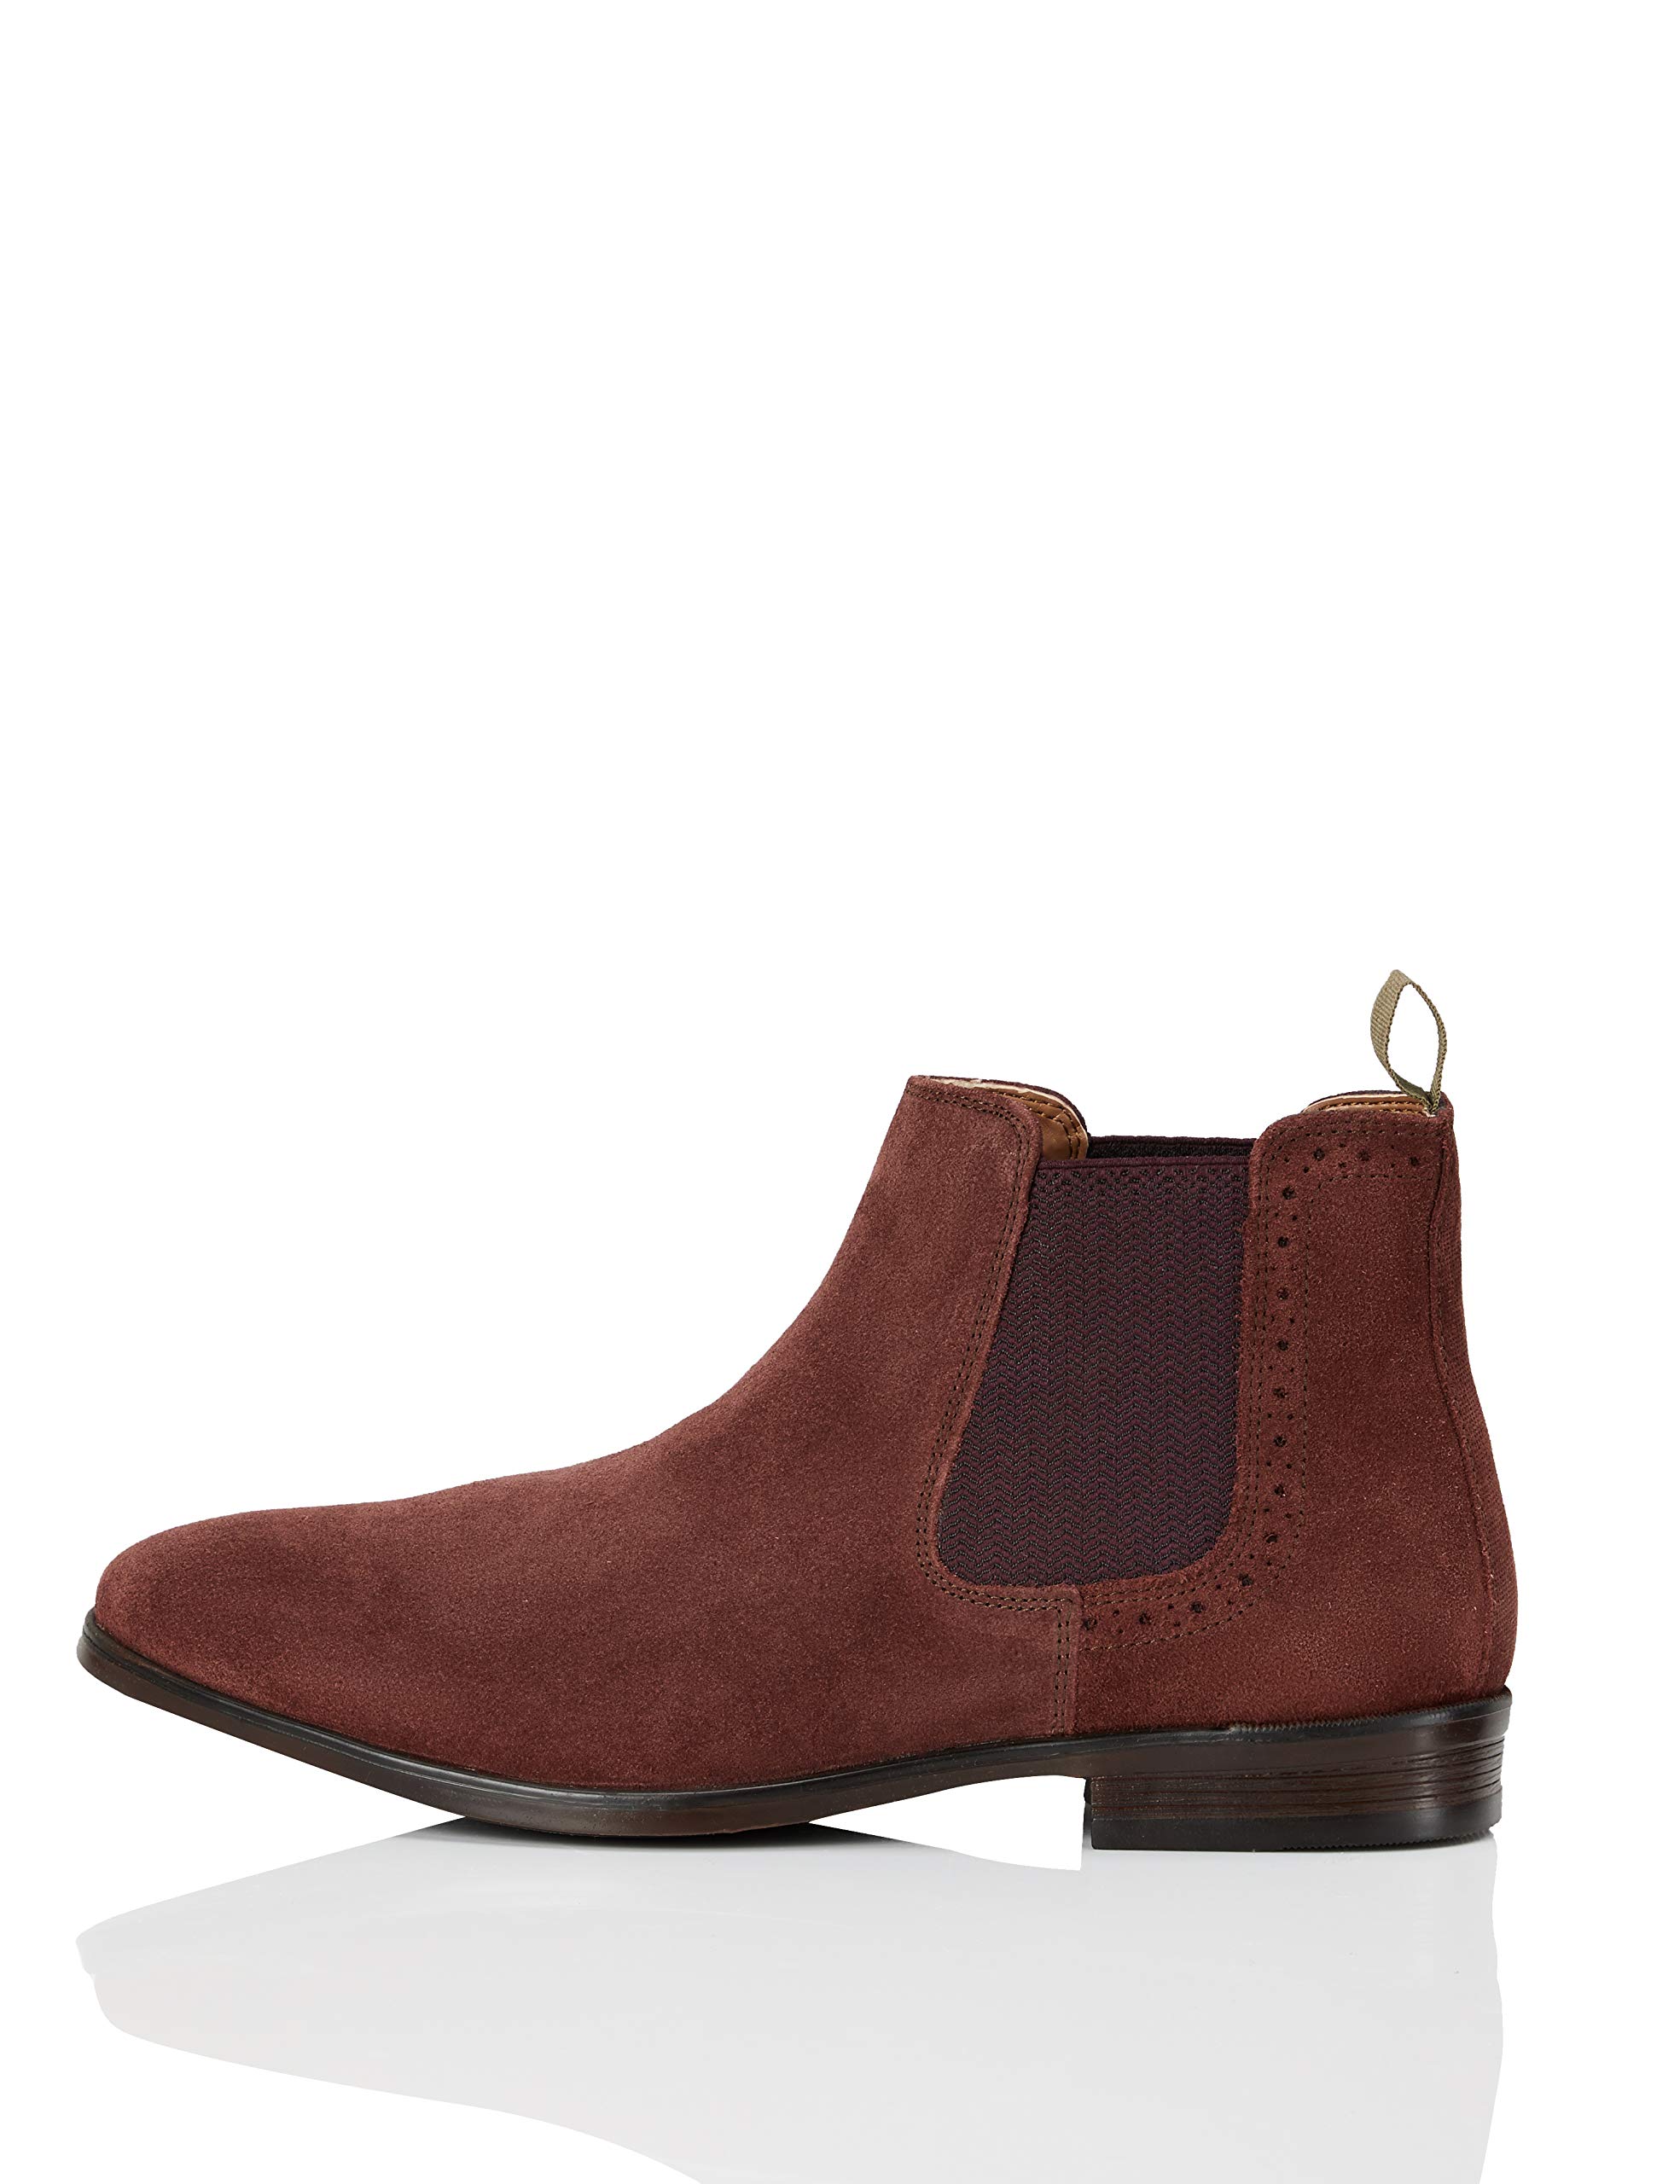 FIND Leather Brogue Detail, Chelsea Boots, Rot (Burgundy), 43 EU (9 UK)